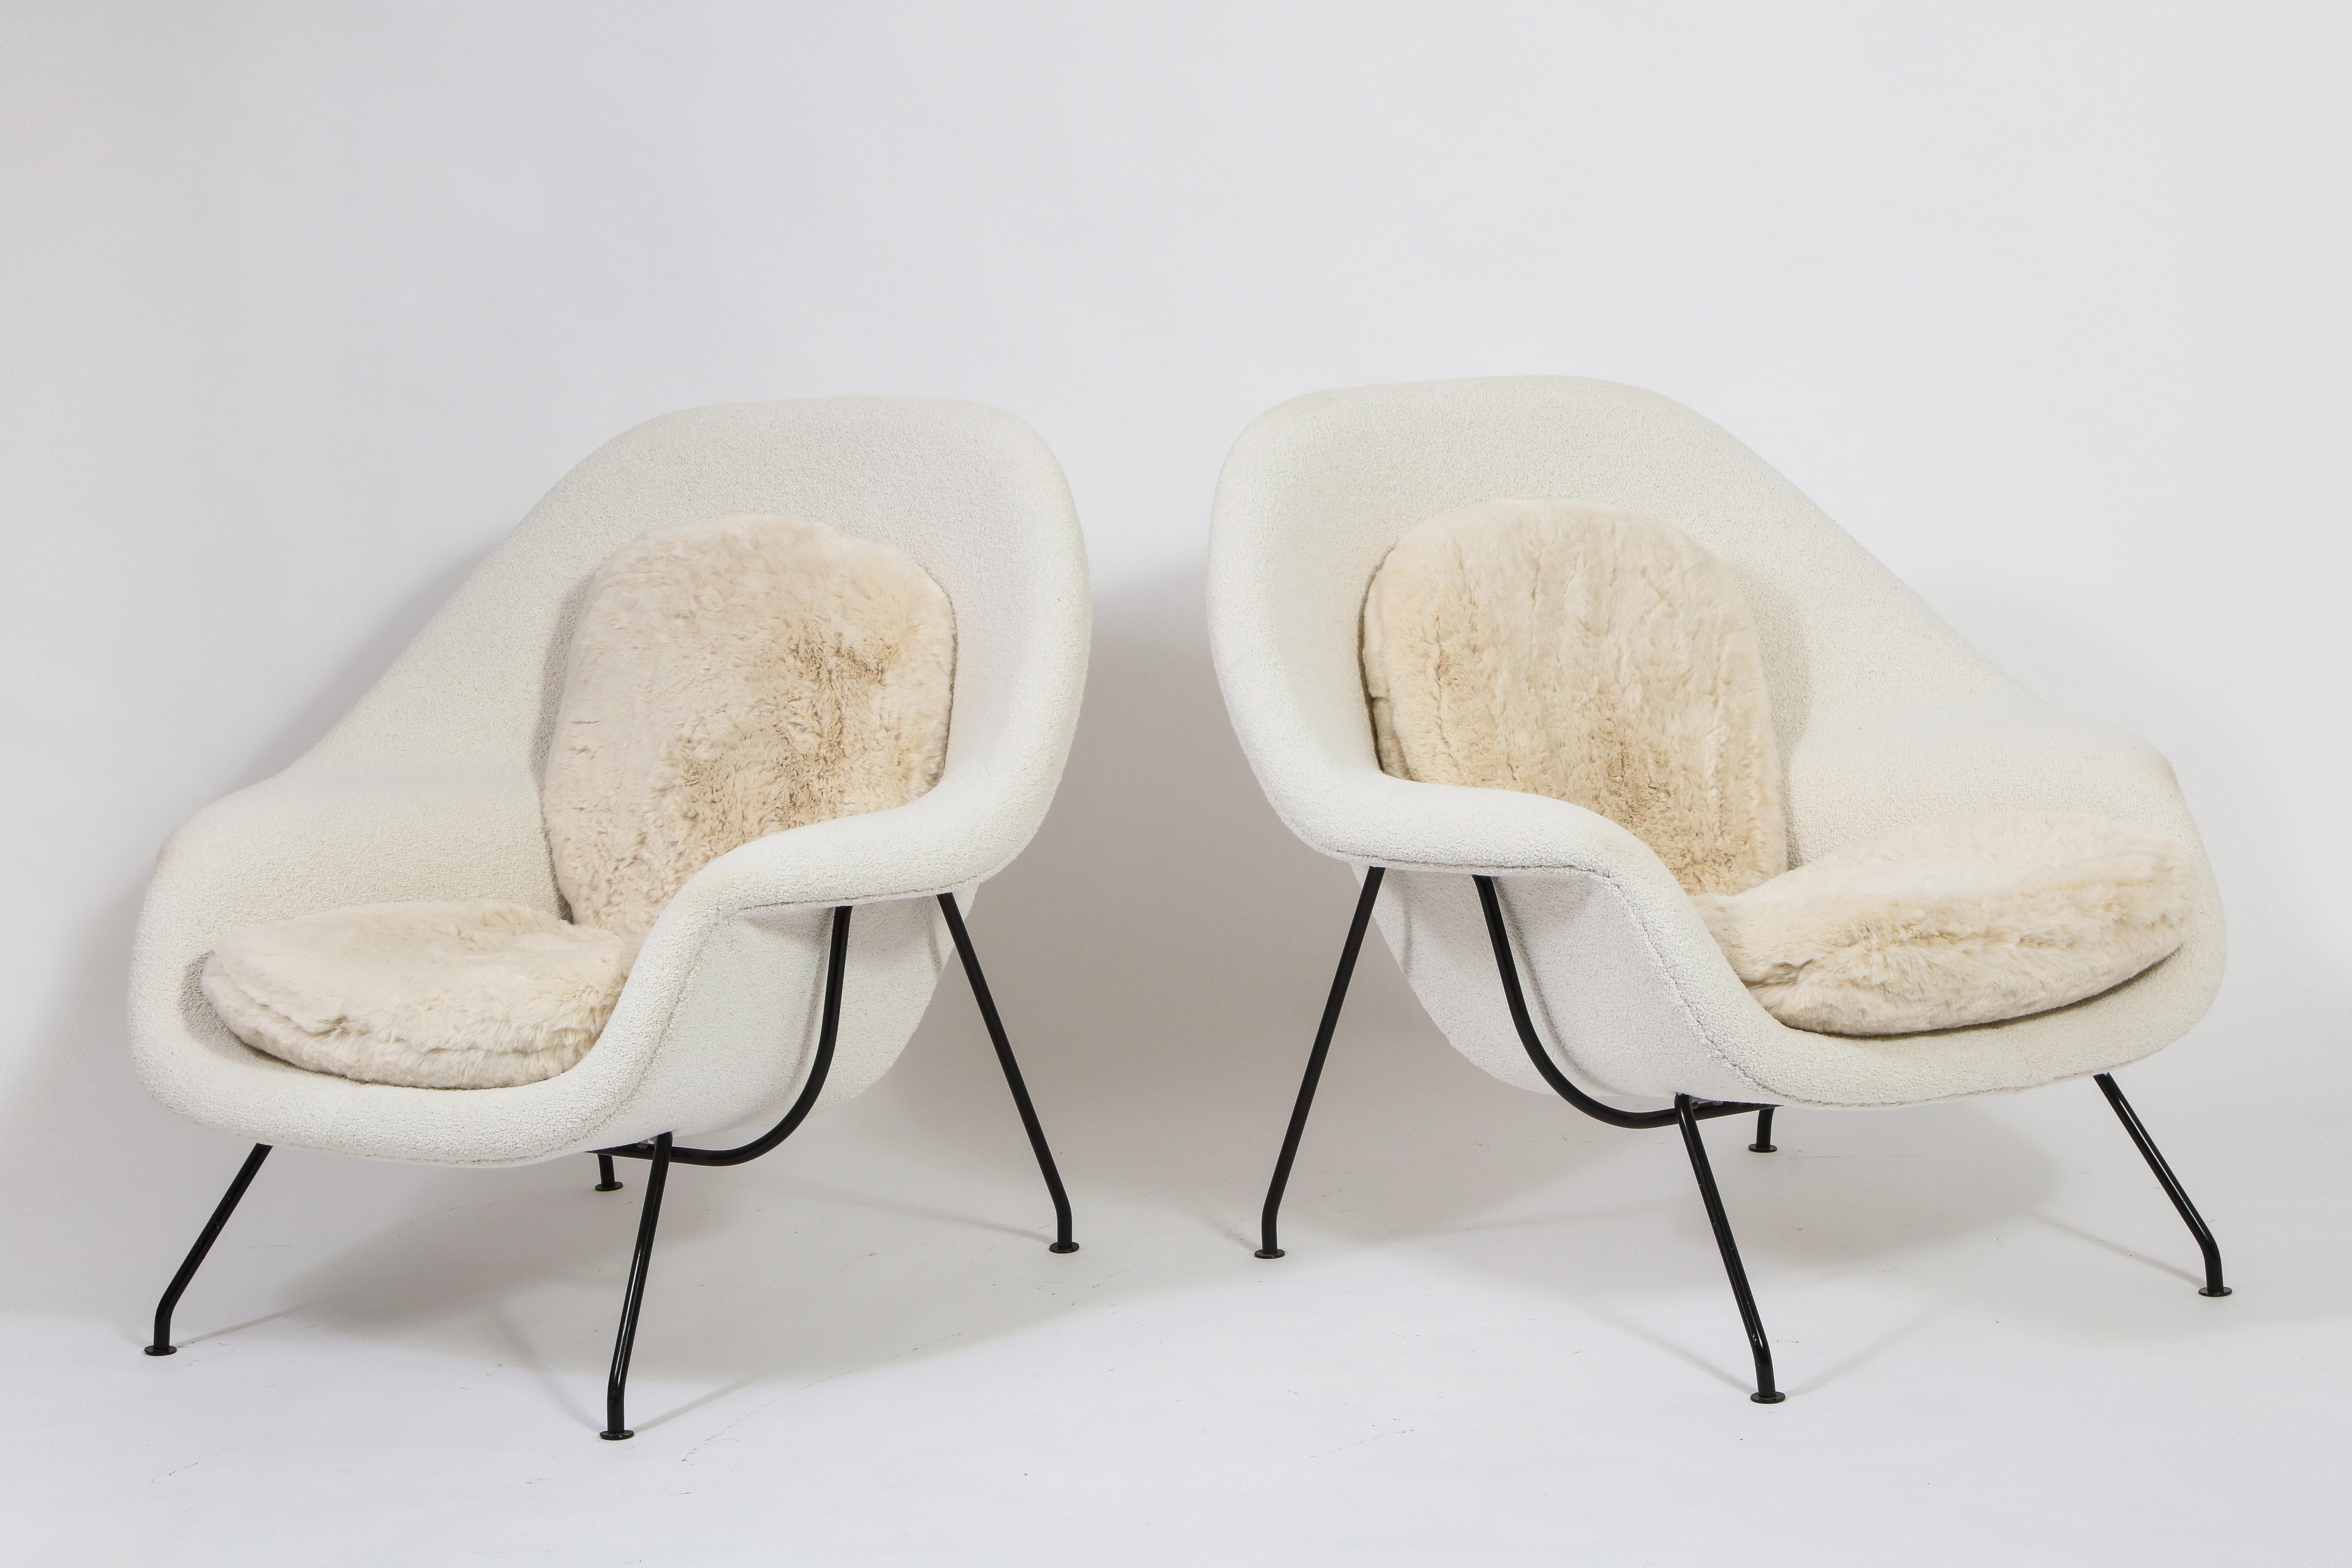 Eero Saarinen for Knoll Pair of Two-Tone Womb Chairs with Ottomans, USA 1955 For Sale 3